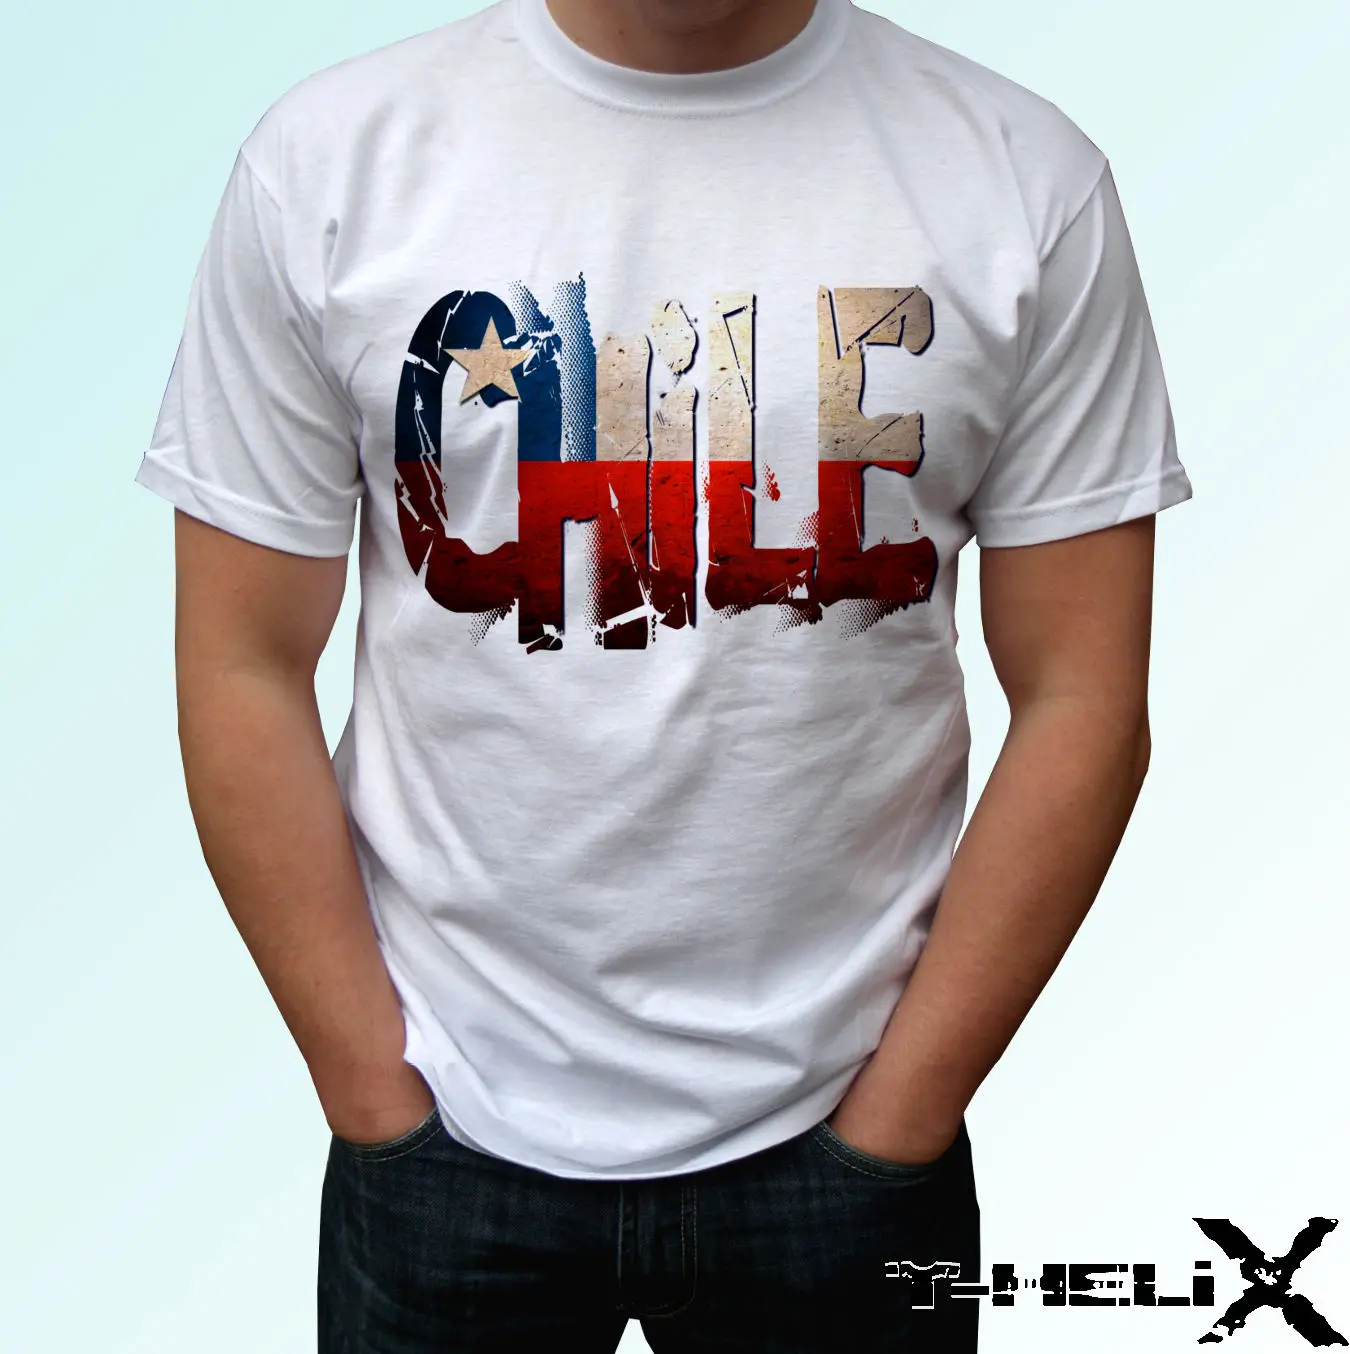 

2019 Summer T Shirt Men O-Neck Tee Shirt Chile Flag - White T Shirt Top Country Design - Mens Sizestshirts